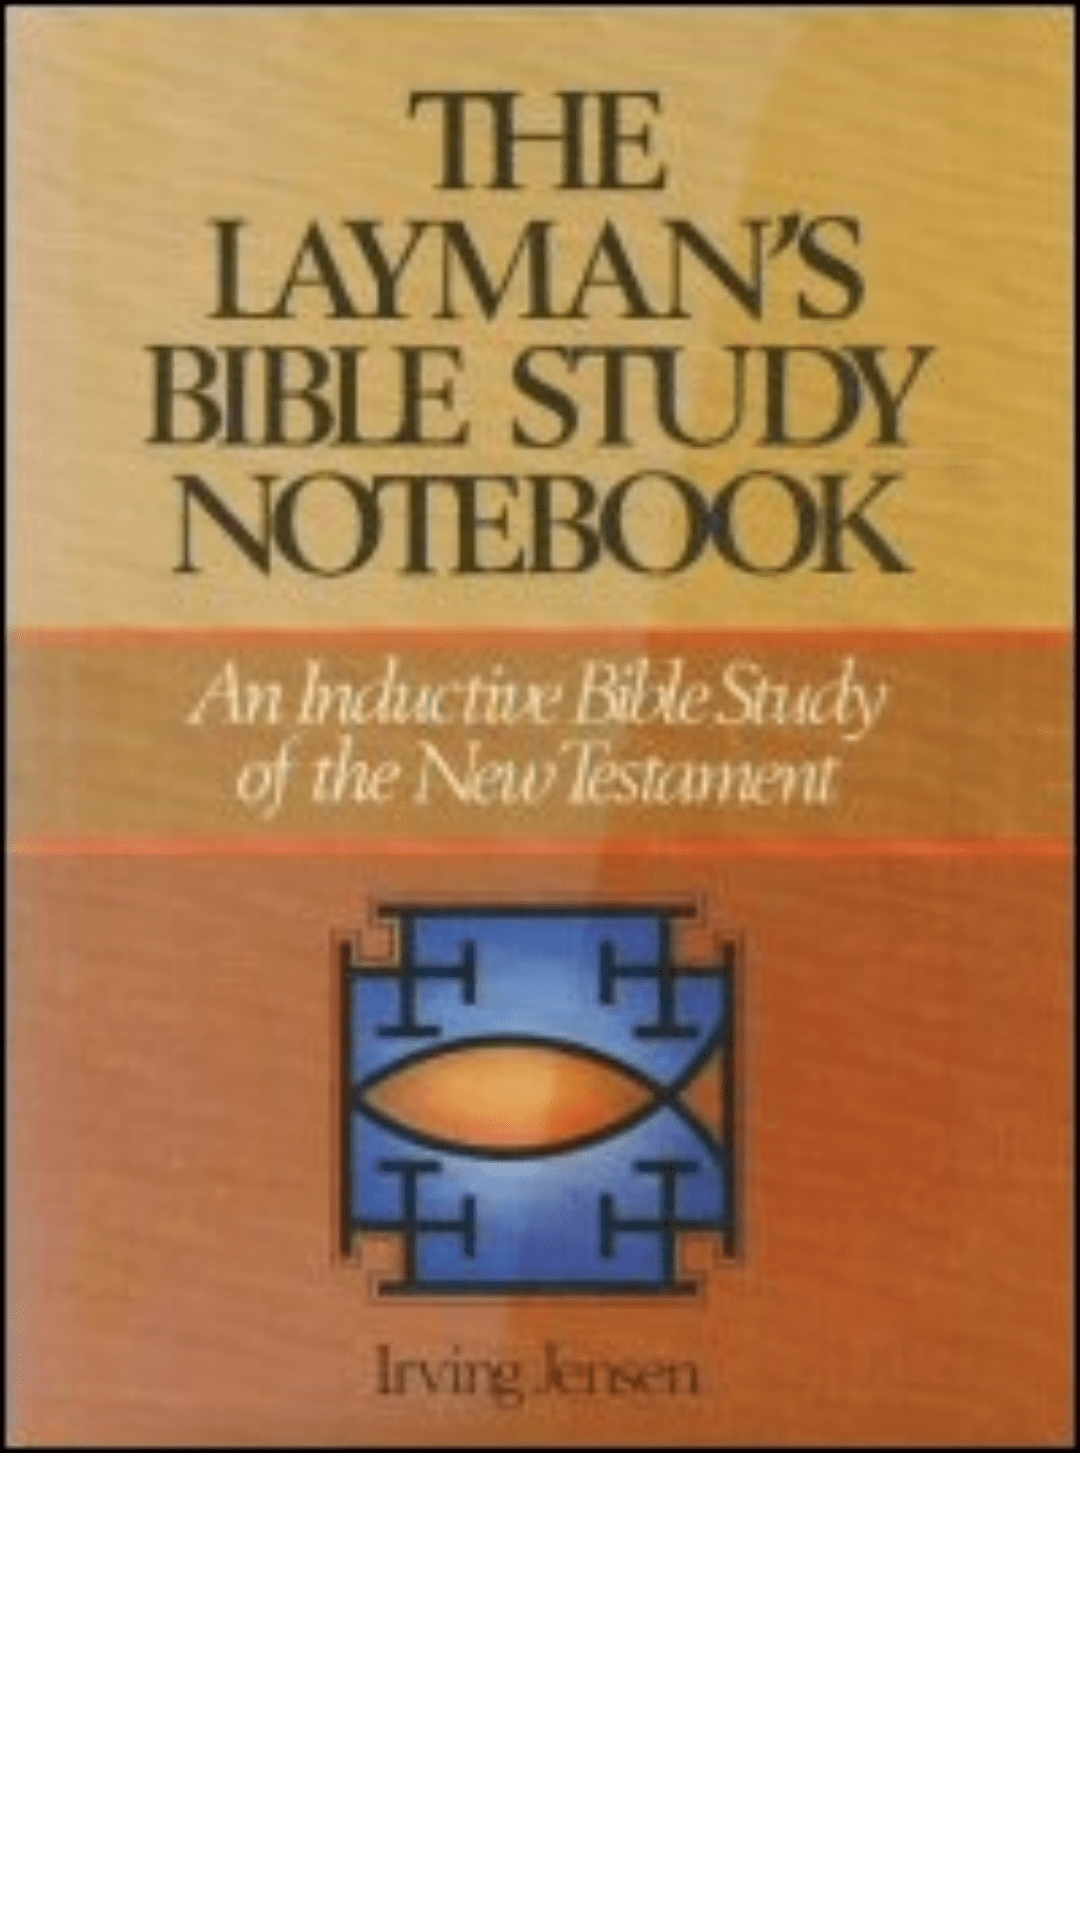 The Layman's Bible Study Notebook